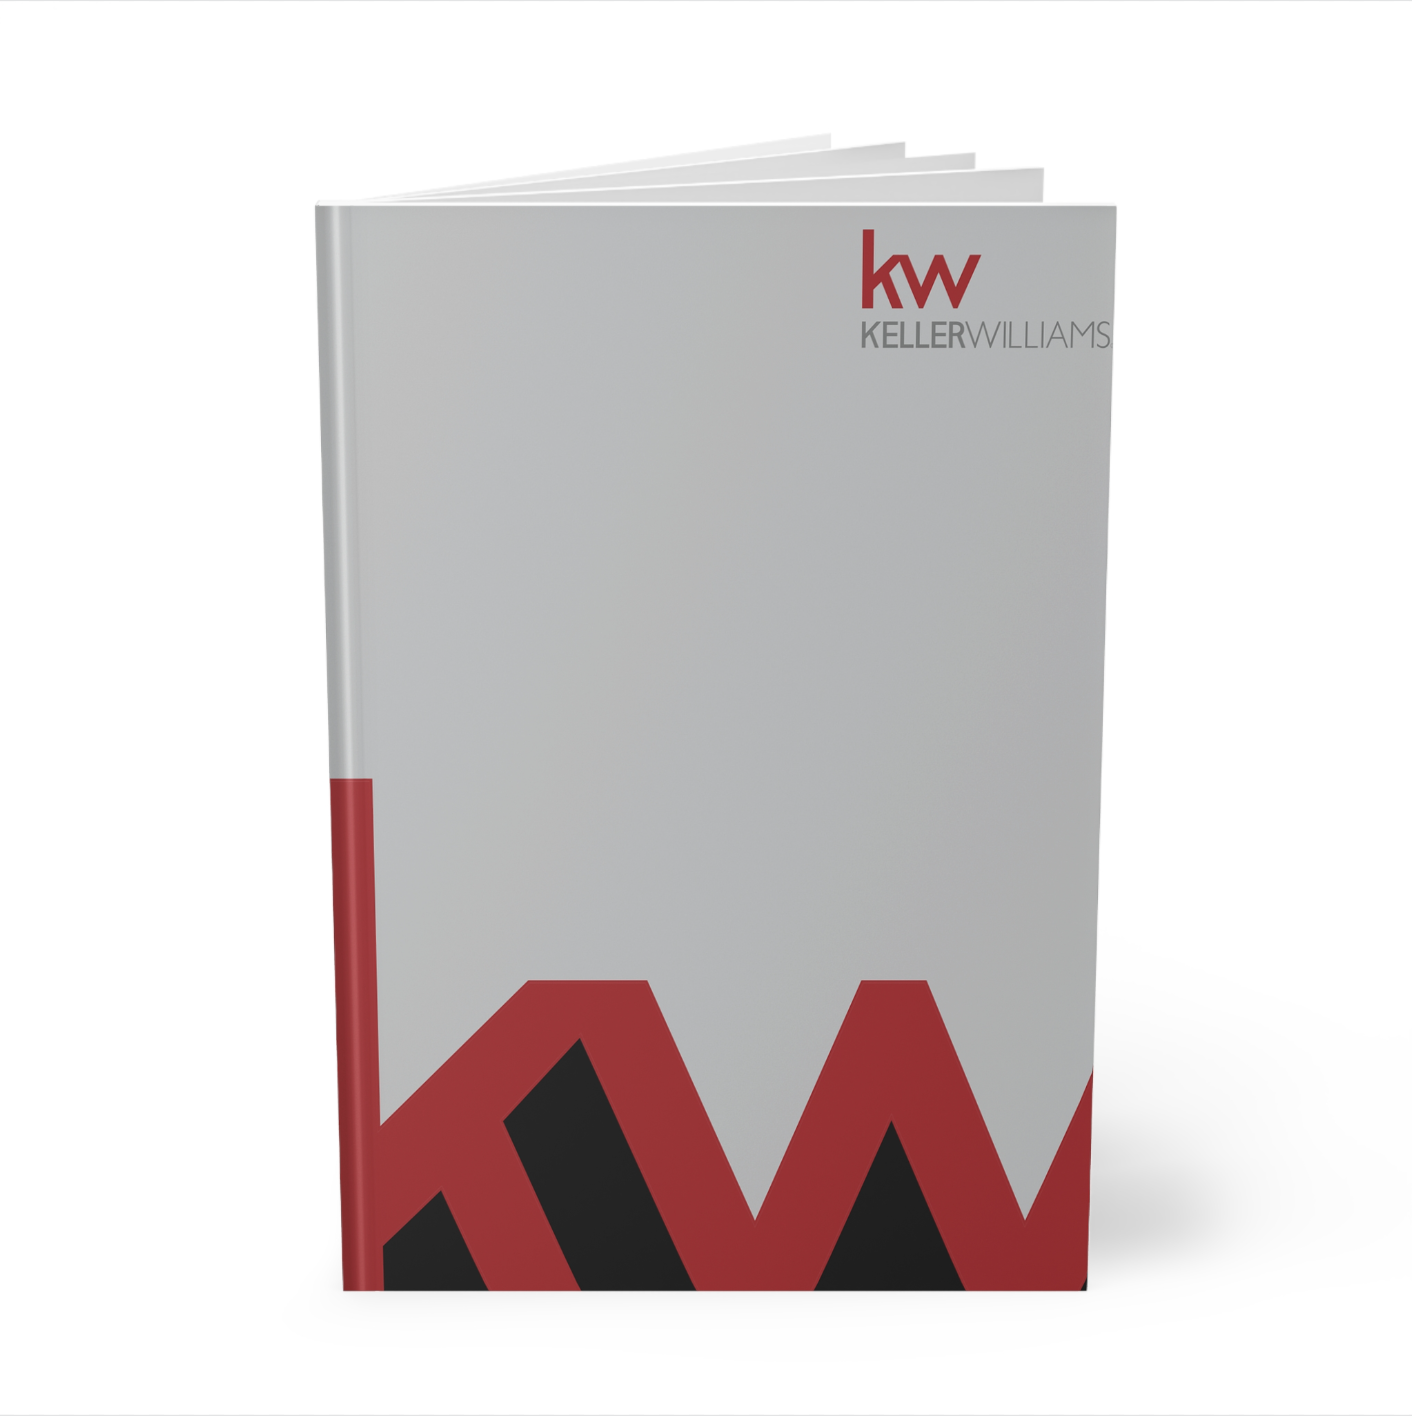 KW Full Color SoftCover Binders White KW Monogram (from as low as $6.18 per cover)